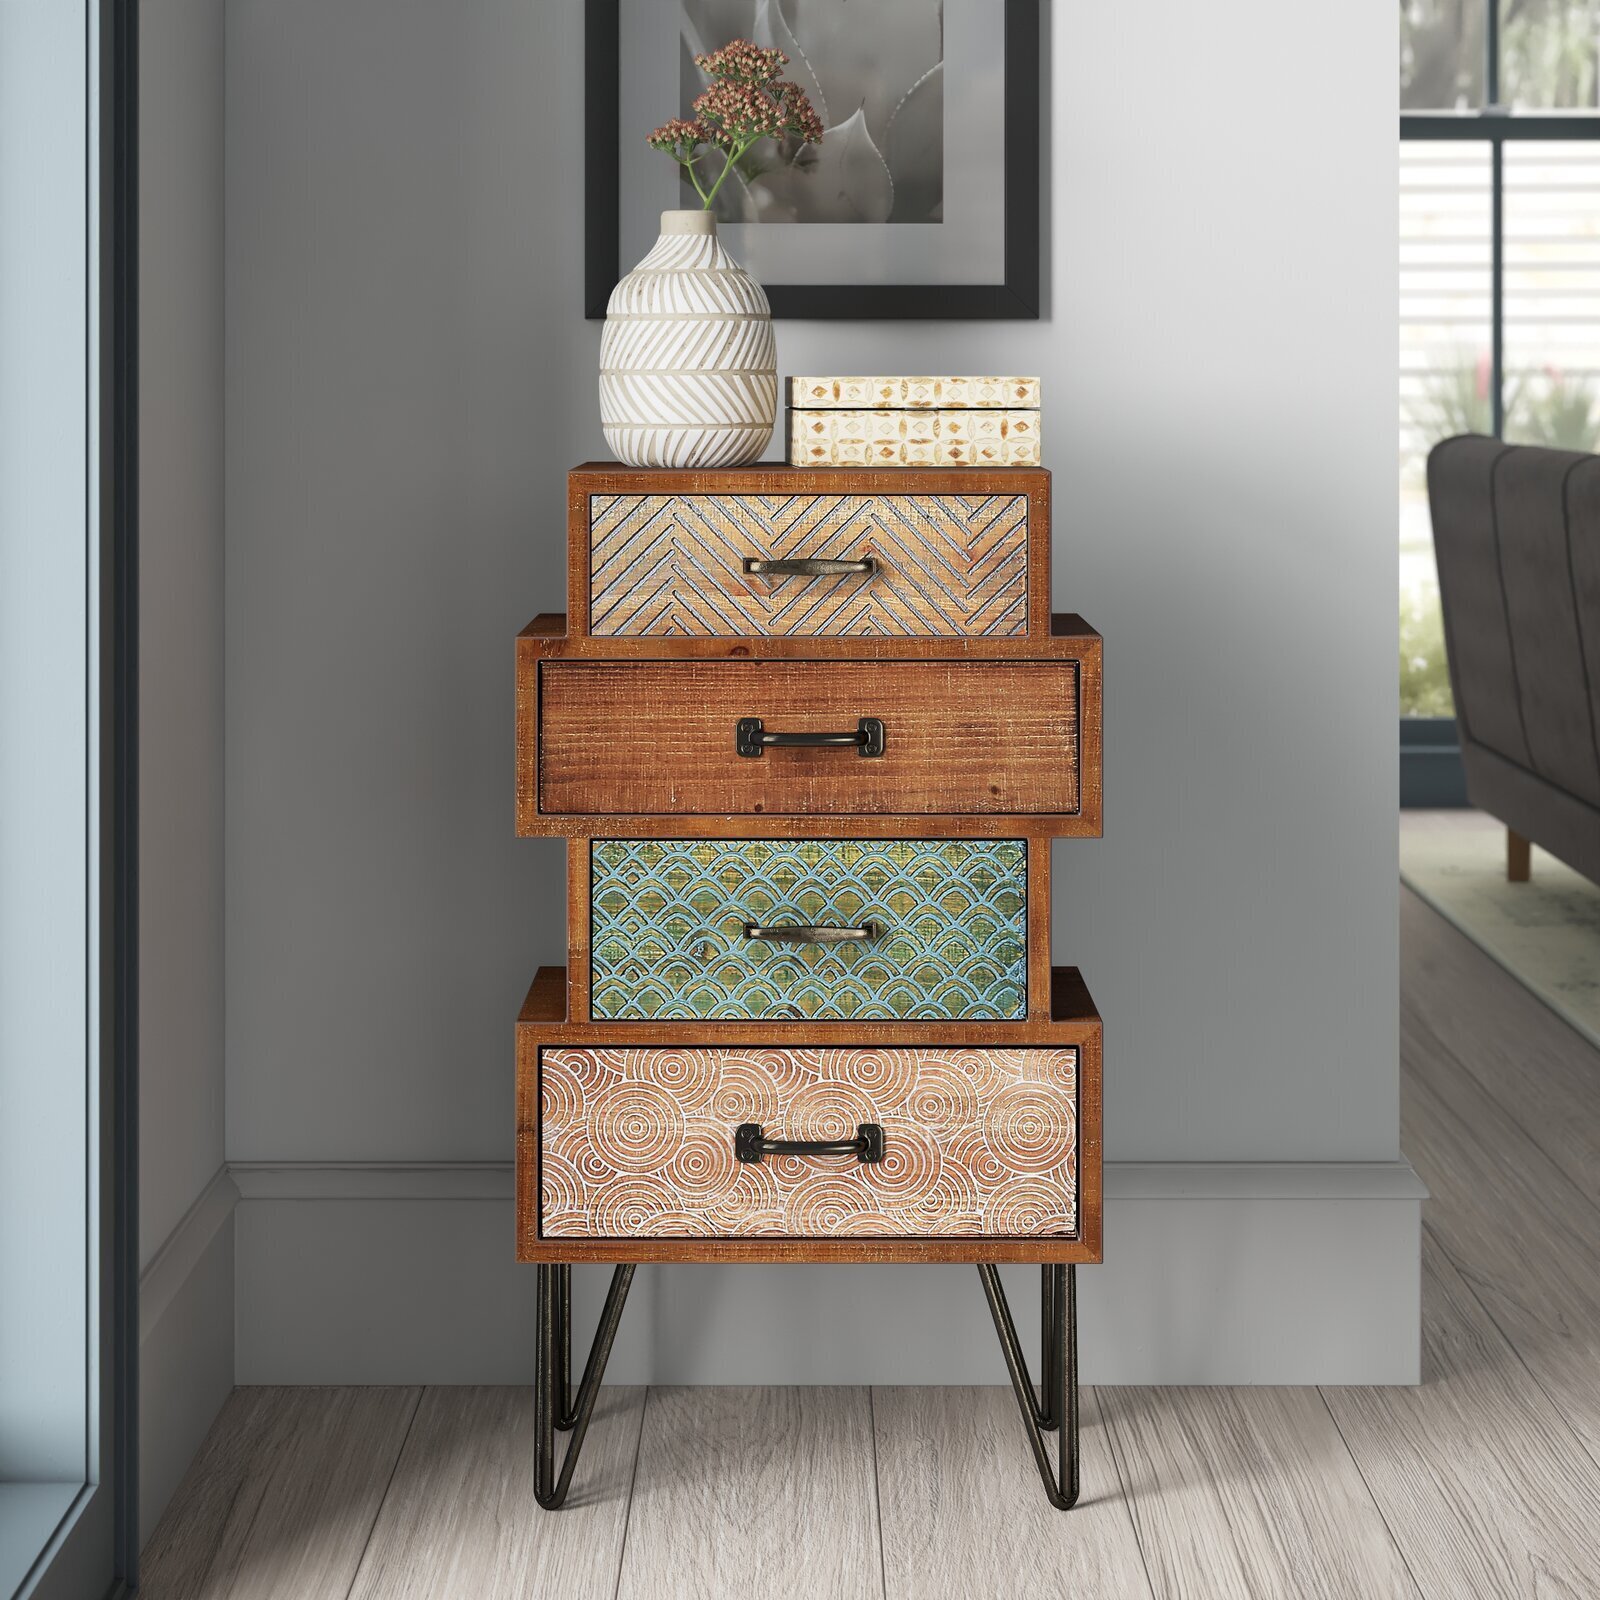 Accent storage cabinets